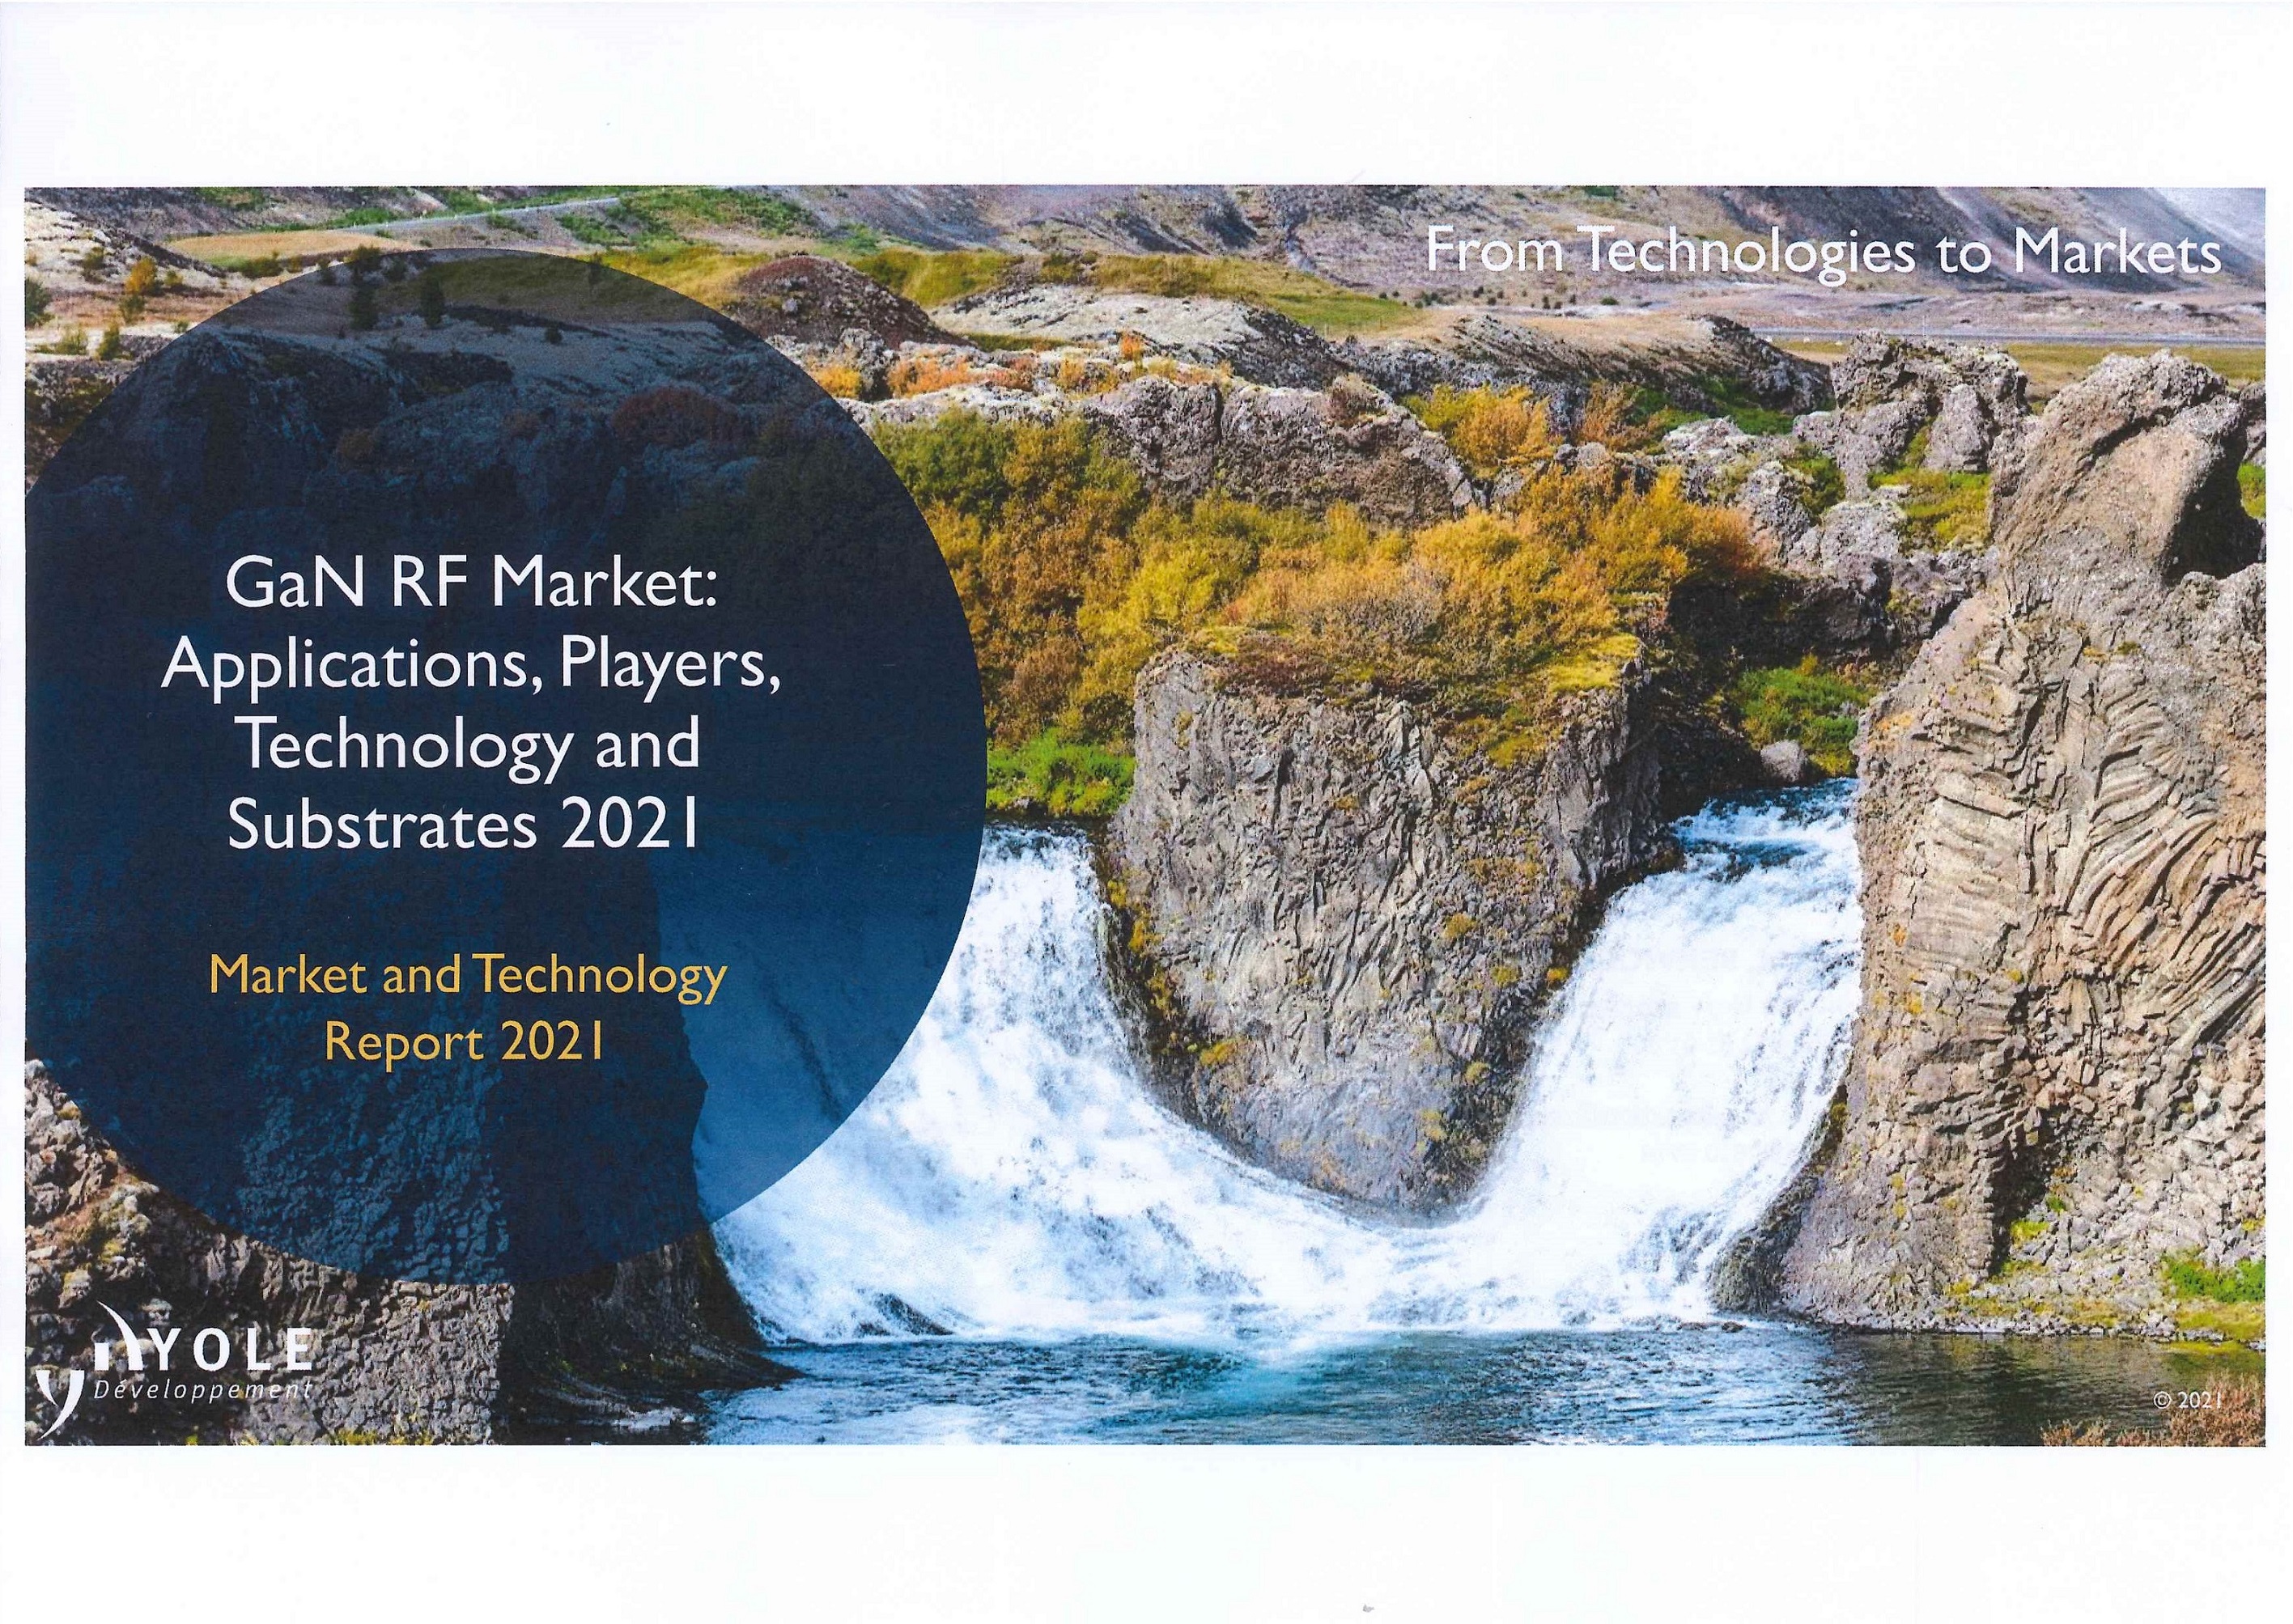 GaN RF market [e-book]:applications, players, technology and substrates 2021:market and technology report 2021